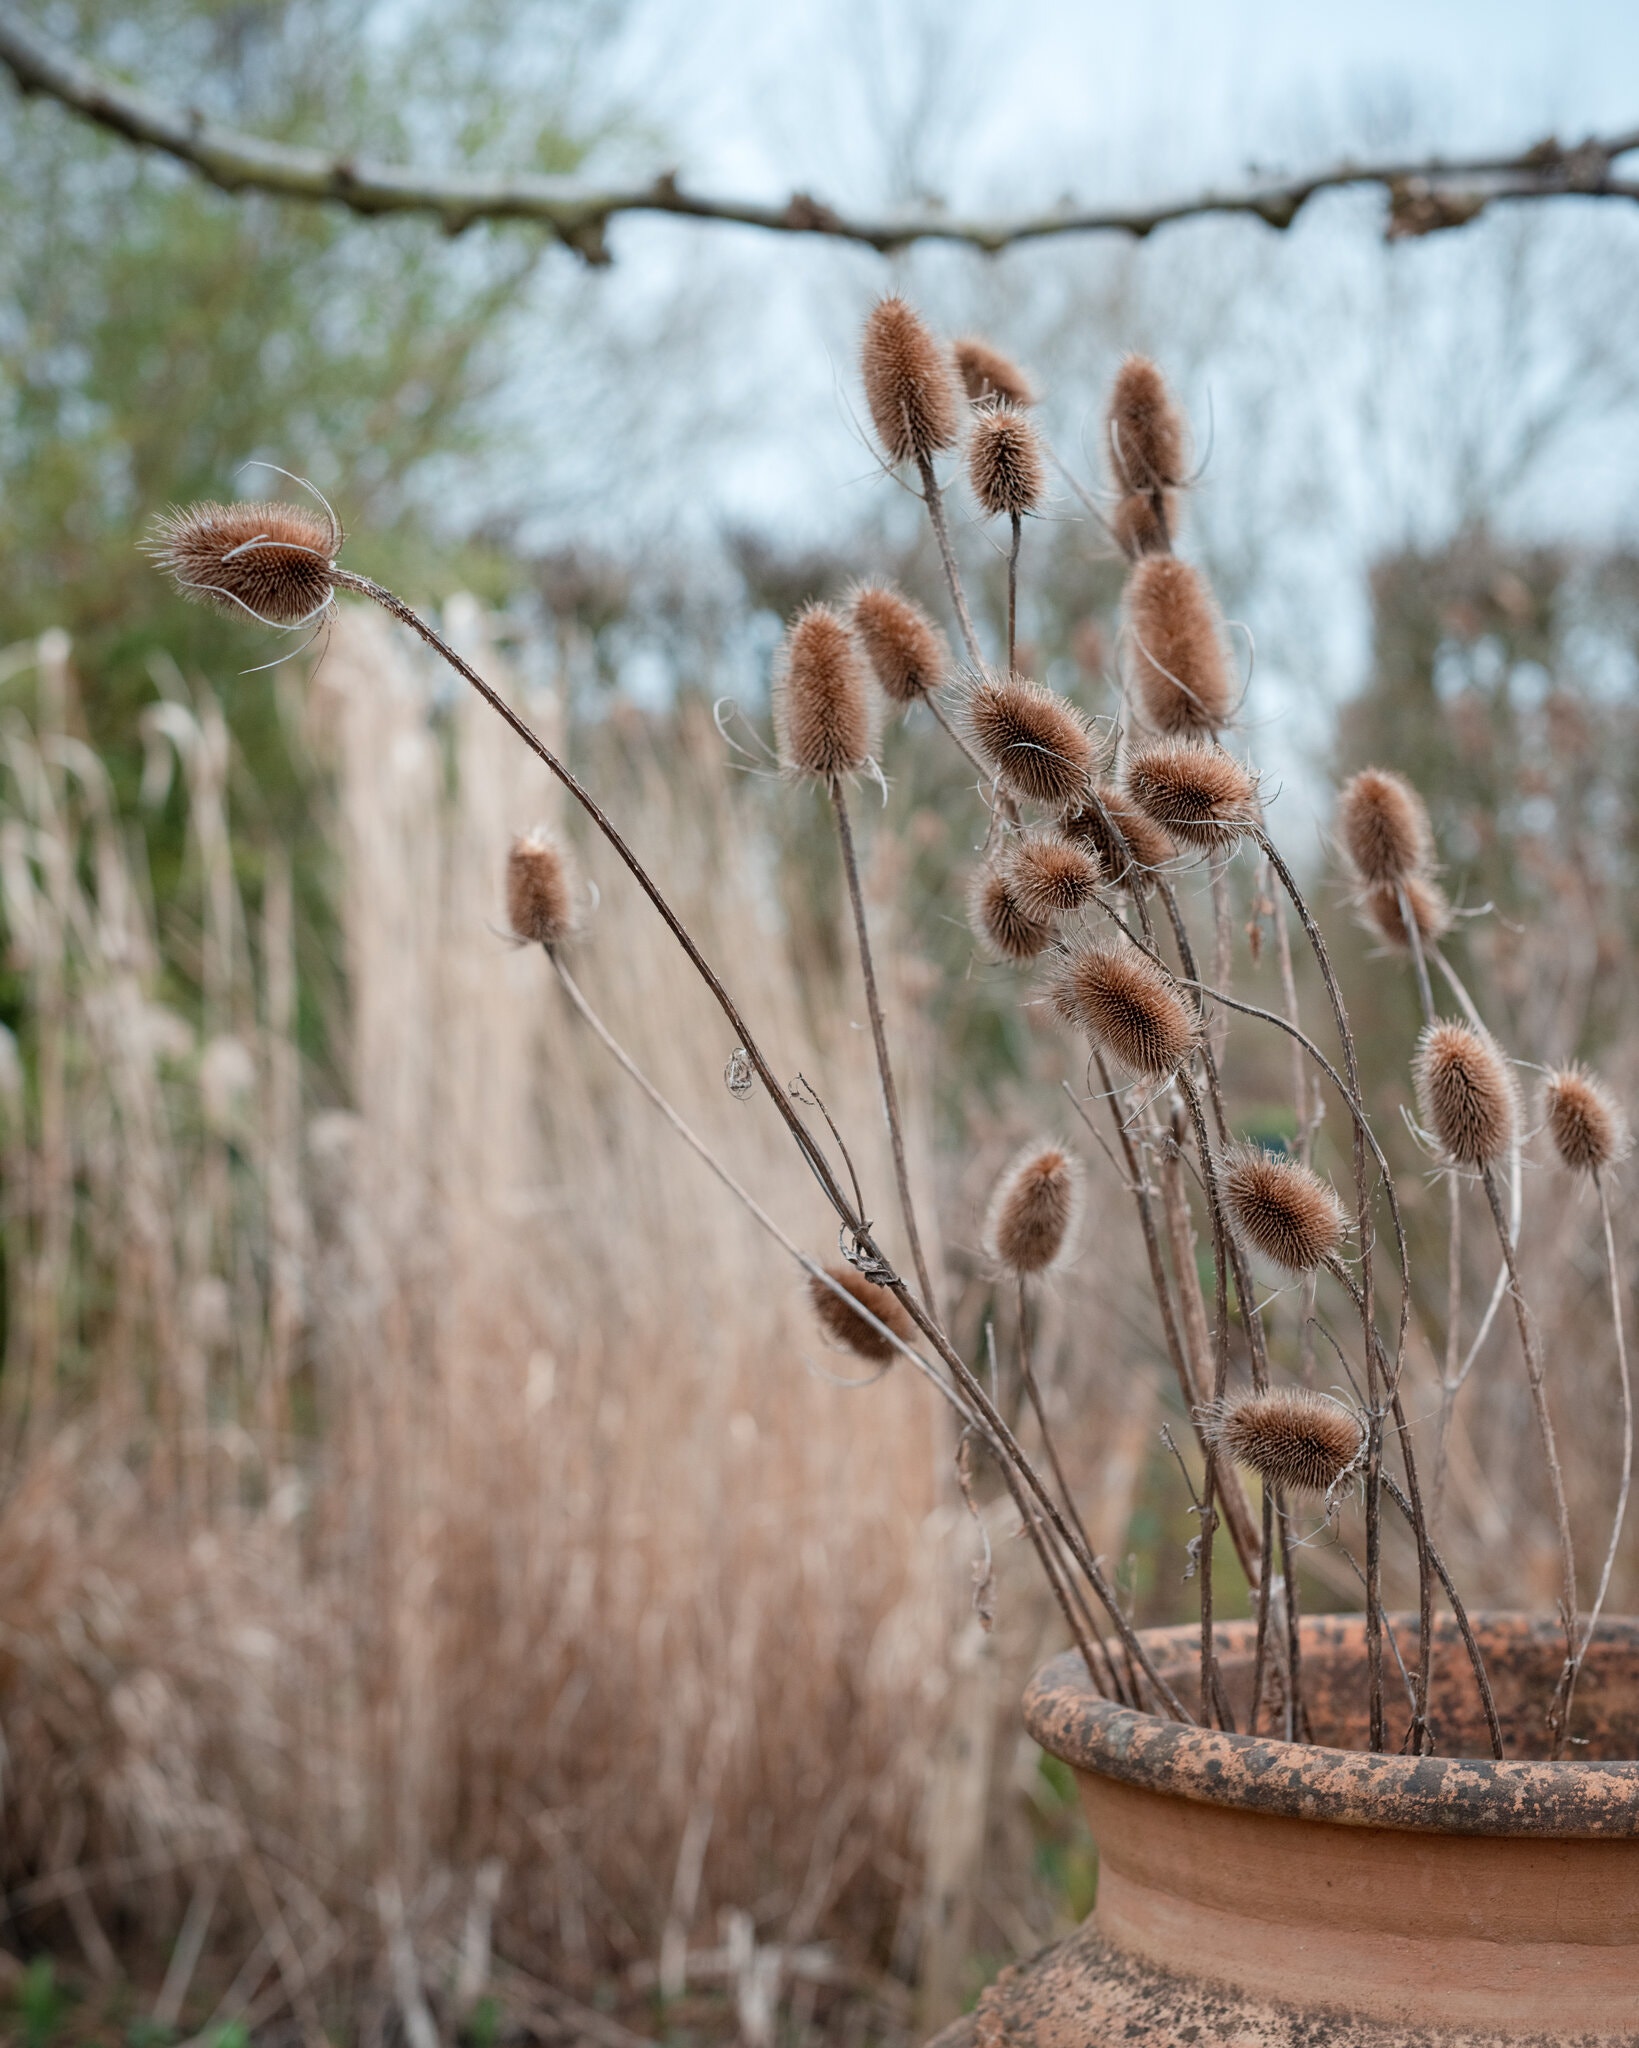 Teasel seed heads. Credit Francesca Jones for The New York Times